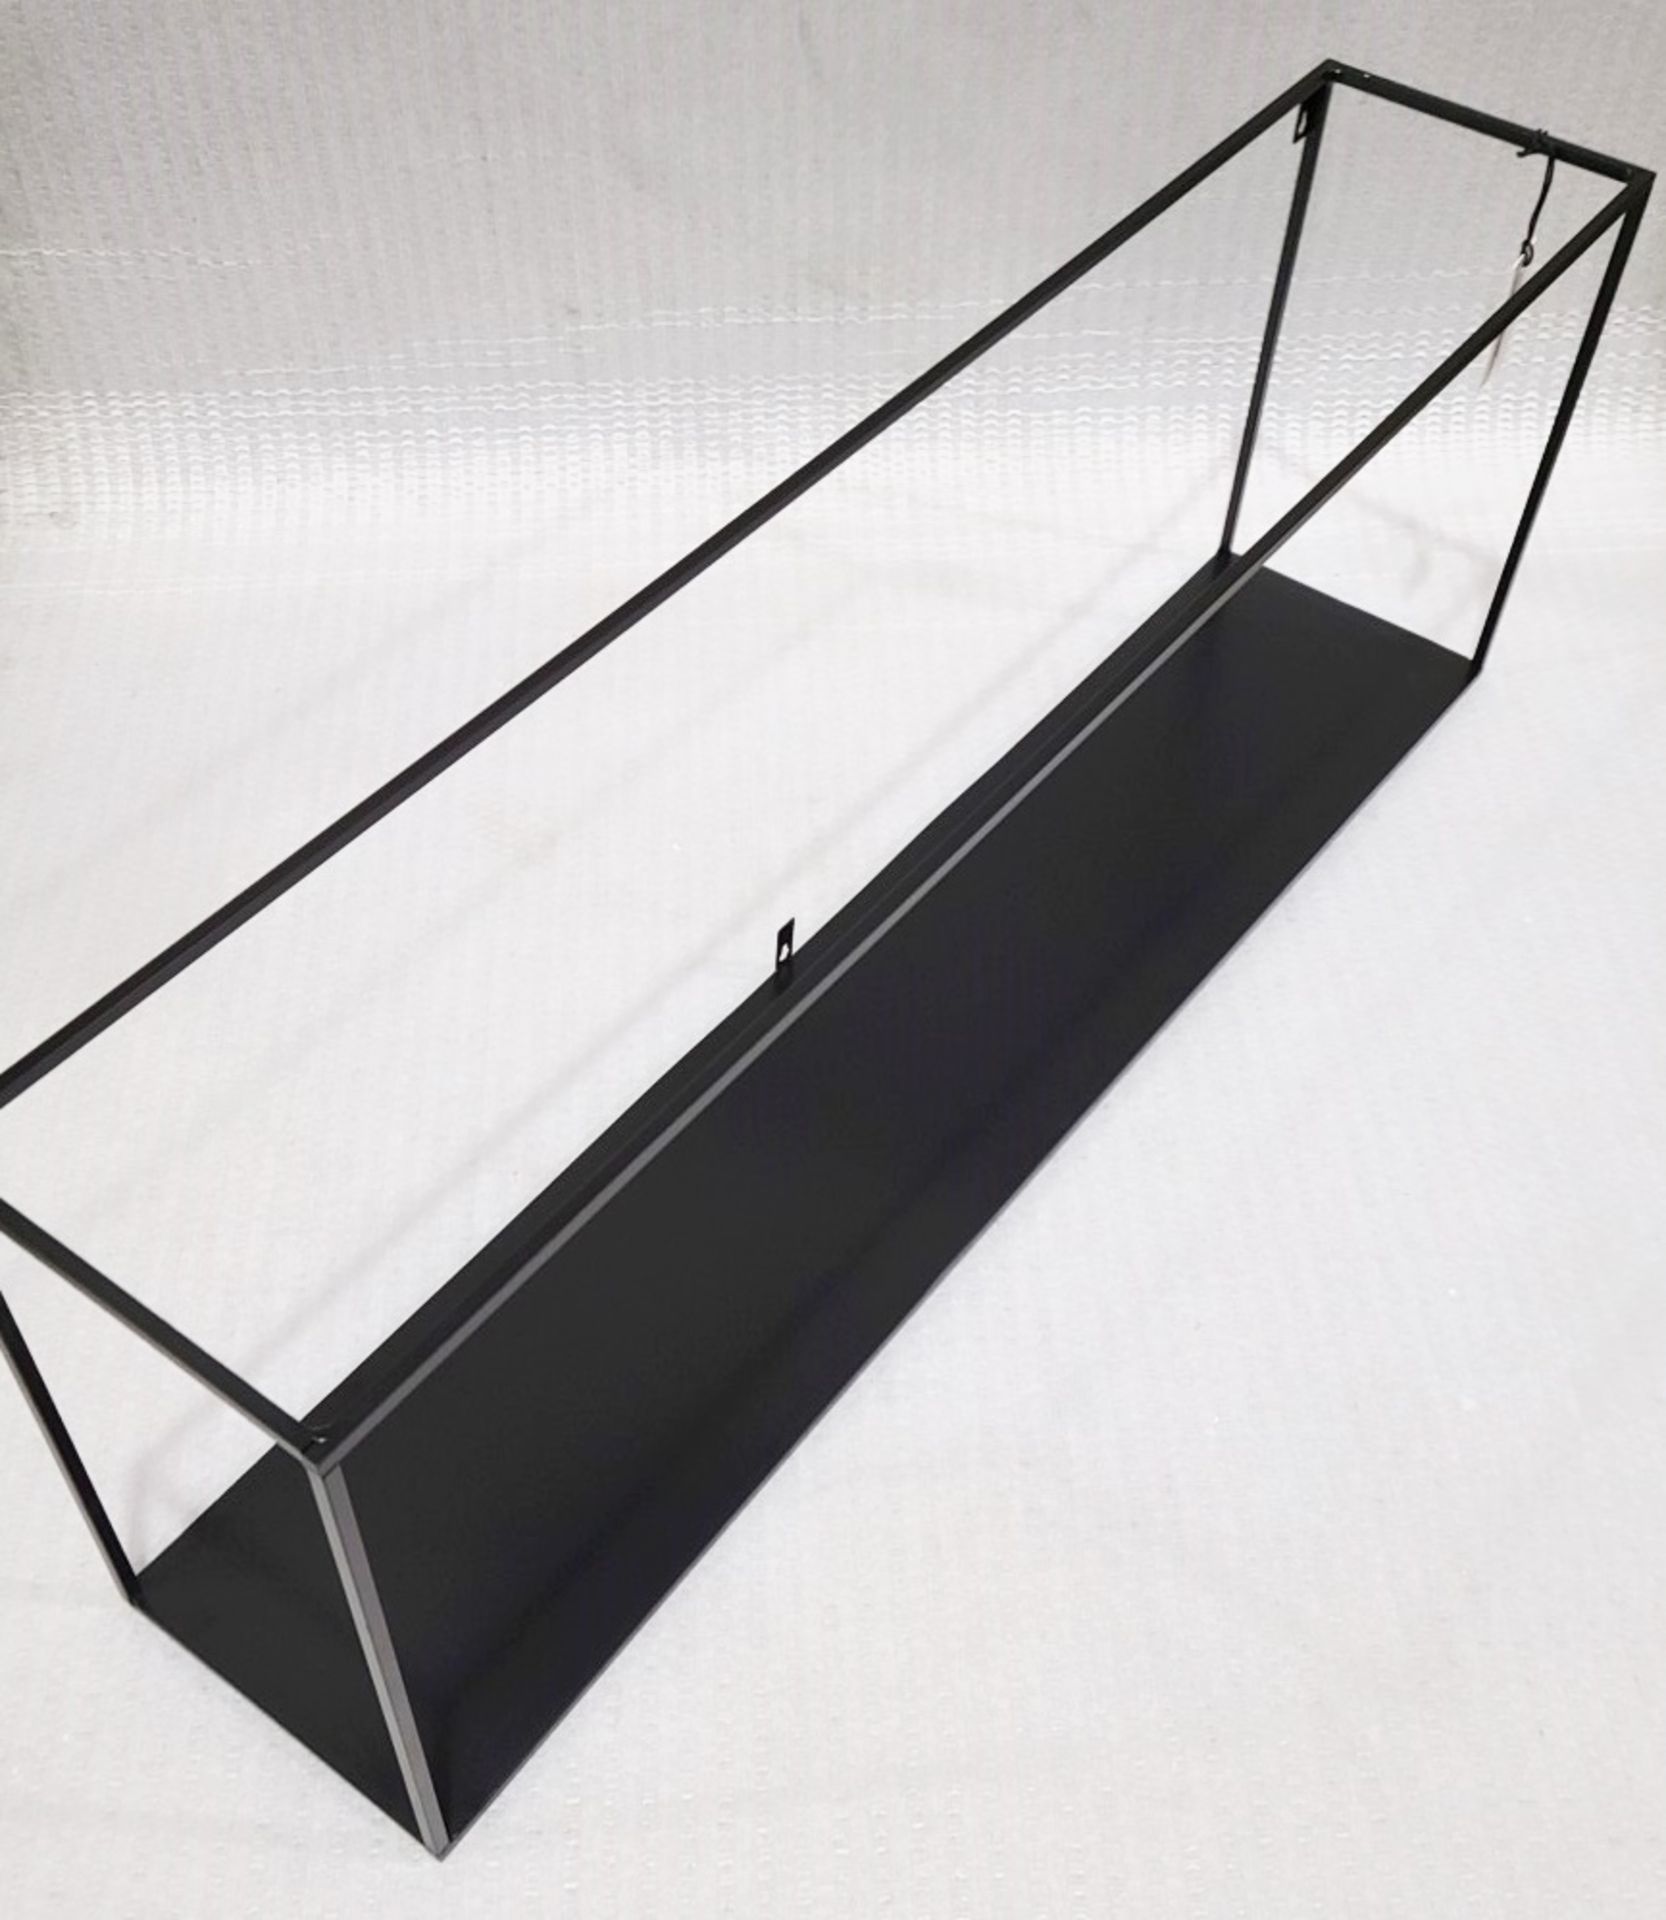 1 x WOOOD 'Meert' Black Metal Extra Storage Wall Shelf With Black Lacquered Finish 100cm - Image 5 of 7